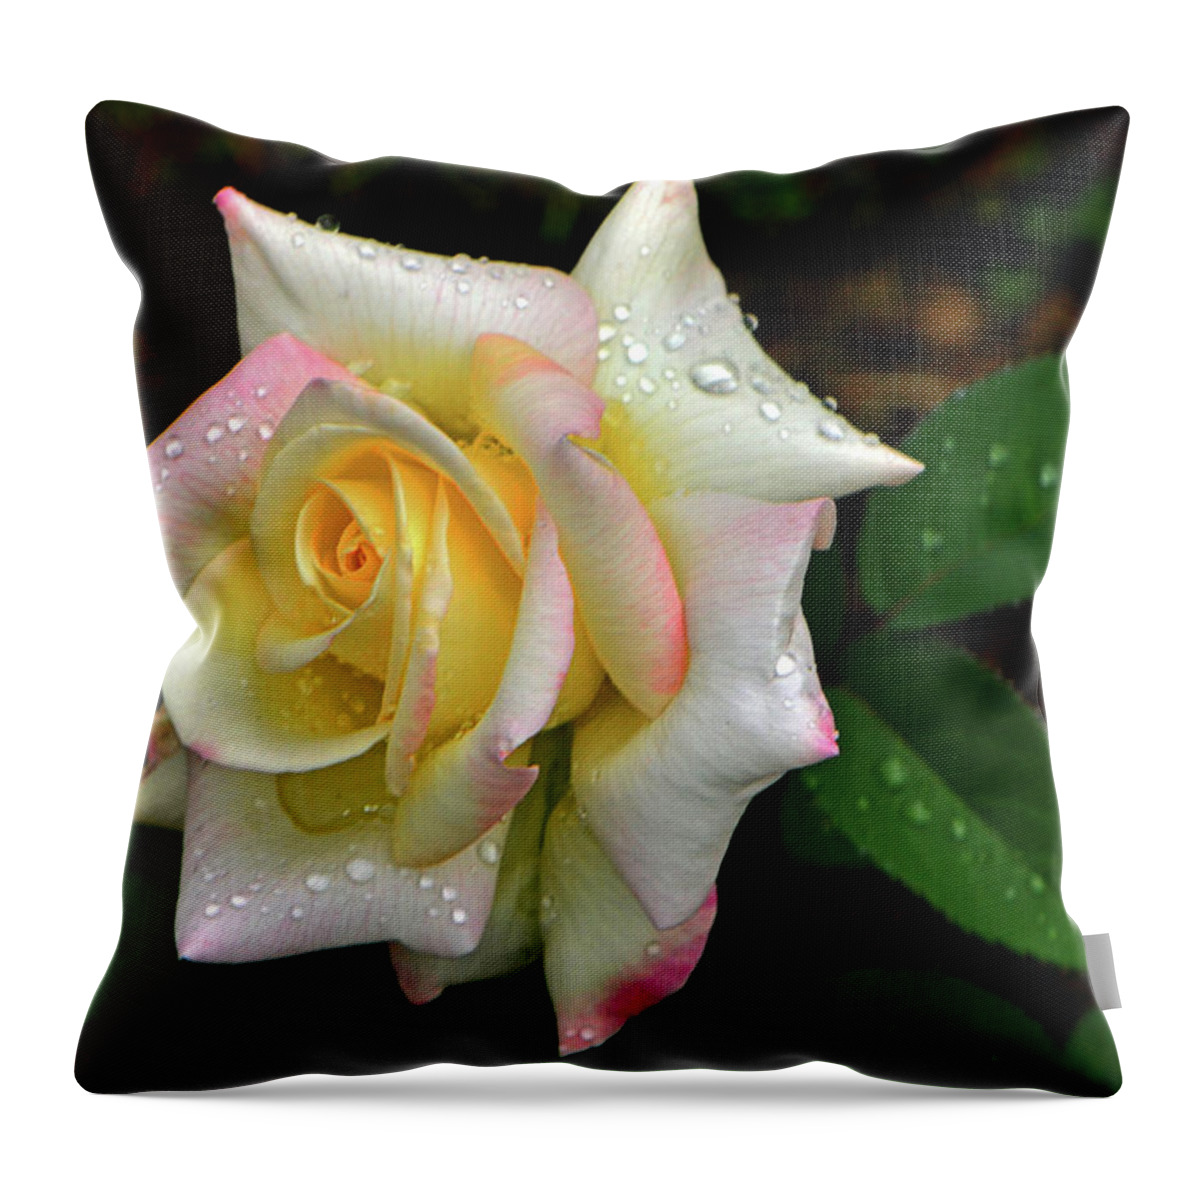 Rose Throw Pillow featuring the photograph Maid Of Honour Rose 003 by George Bostian